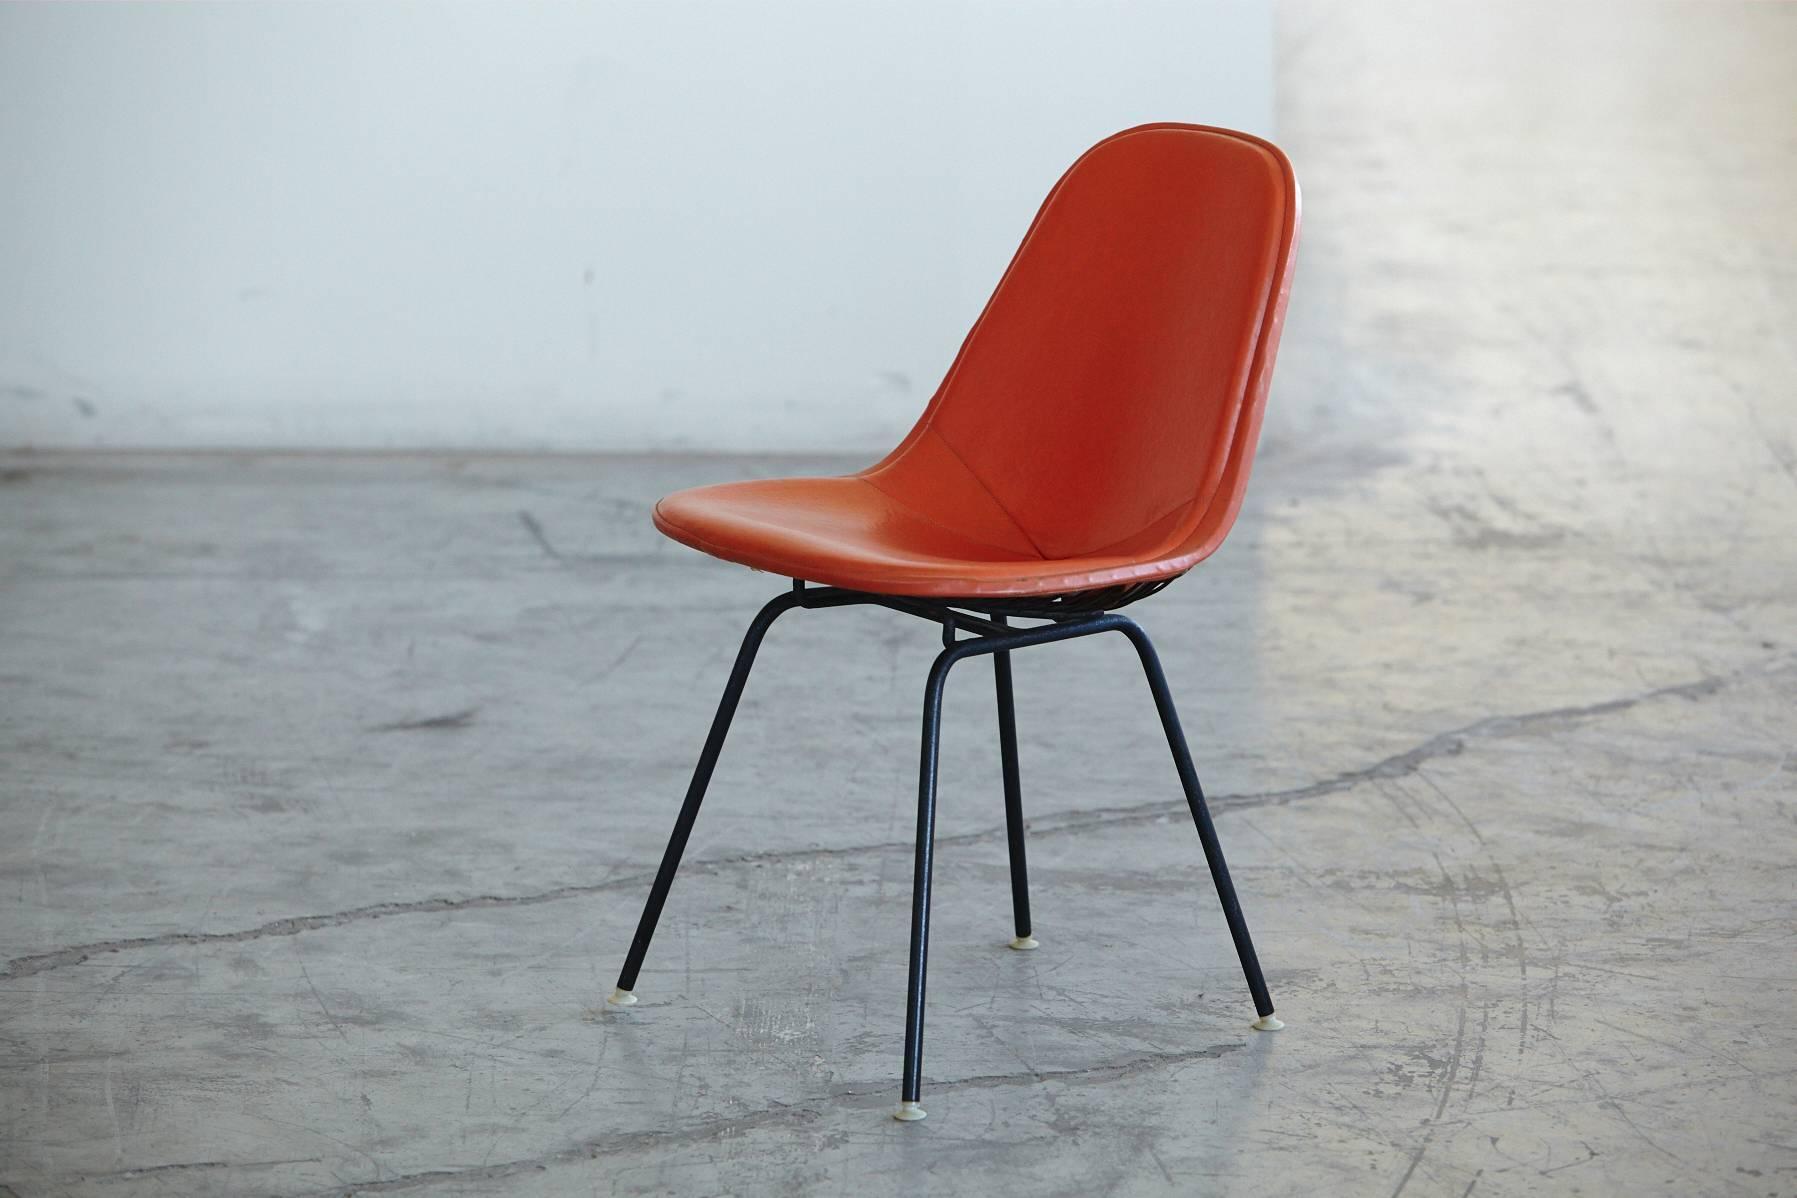 Original Eames DKX-1 Side Chair in Orange Leather for Herman Miller, 1960s For Sale 4